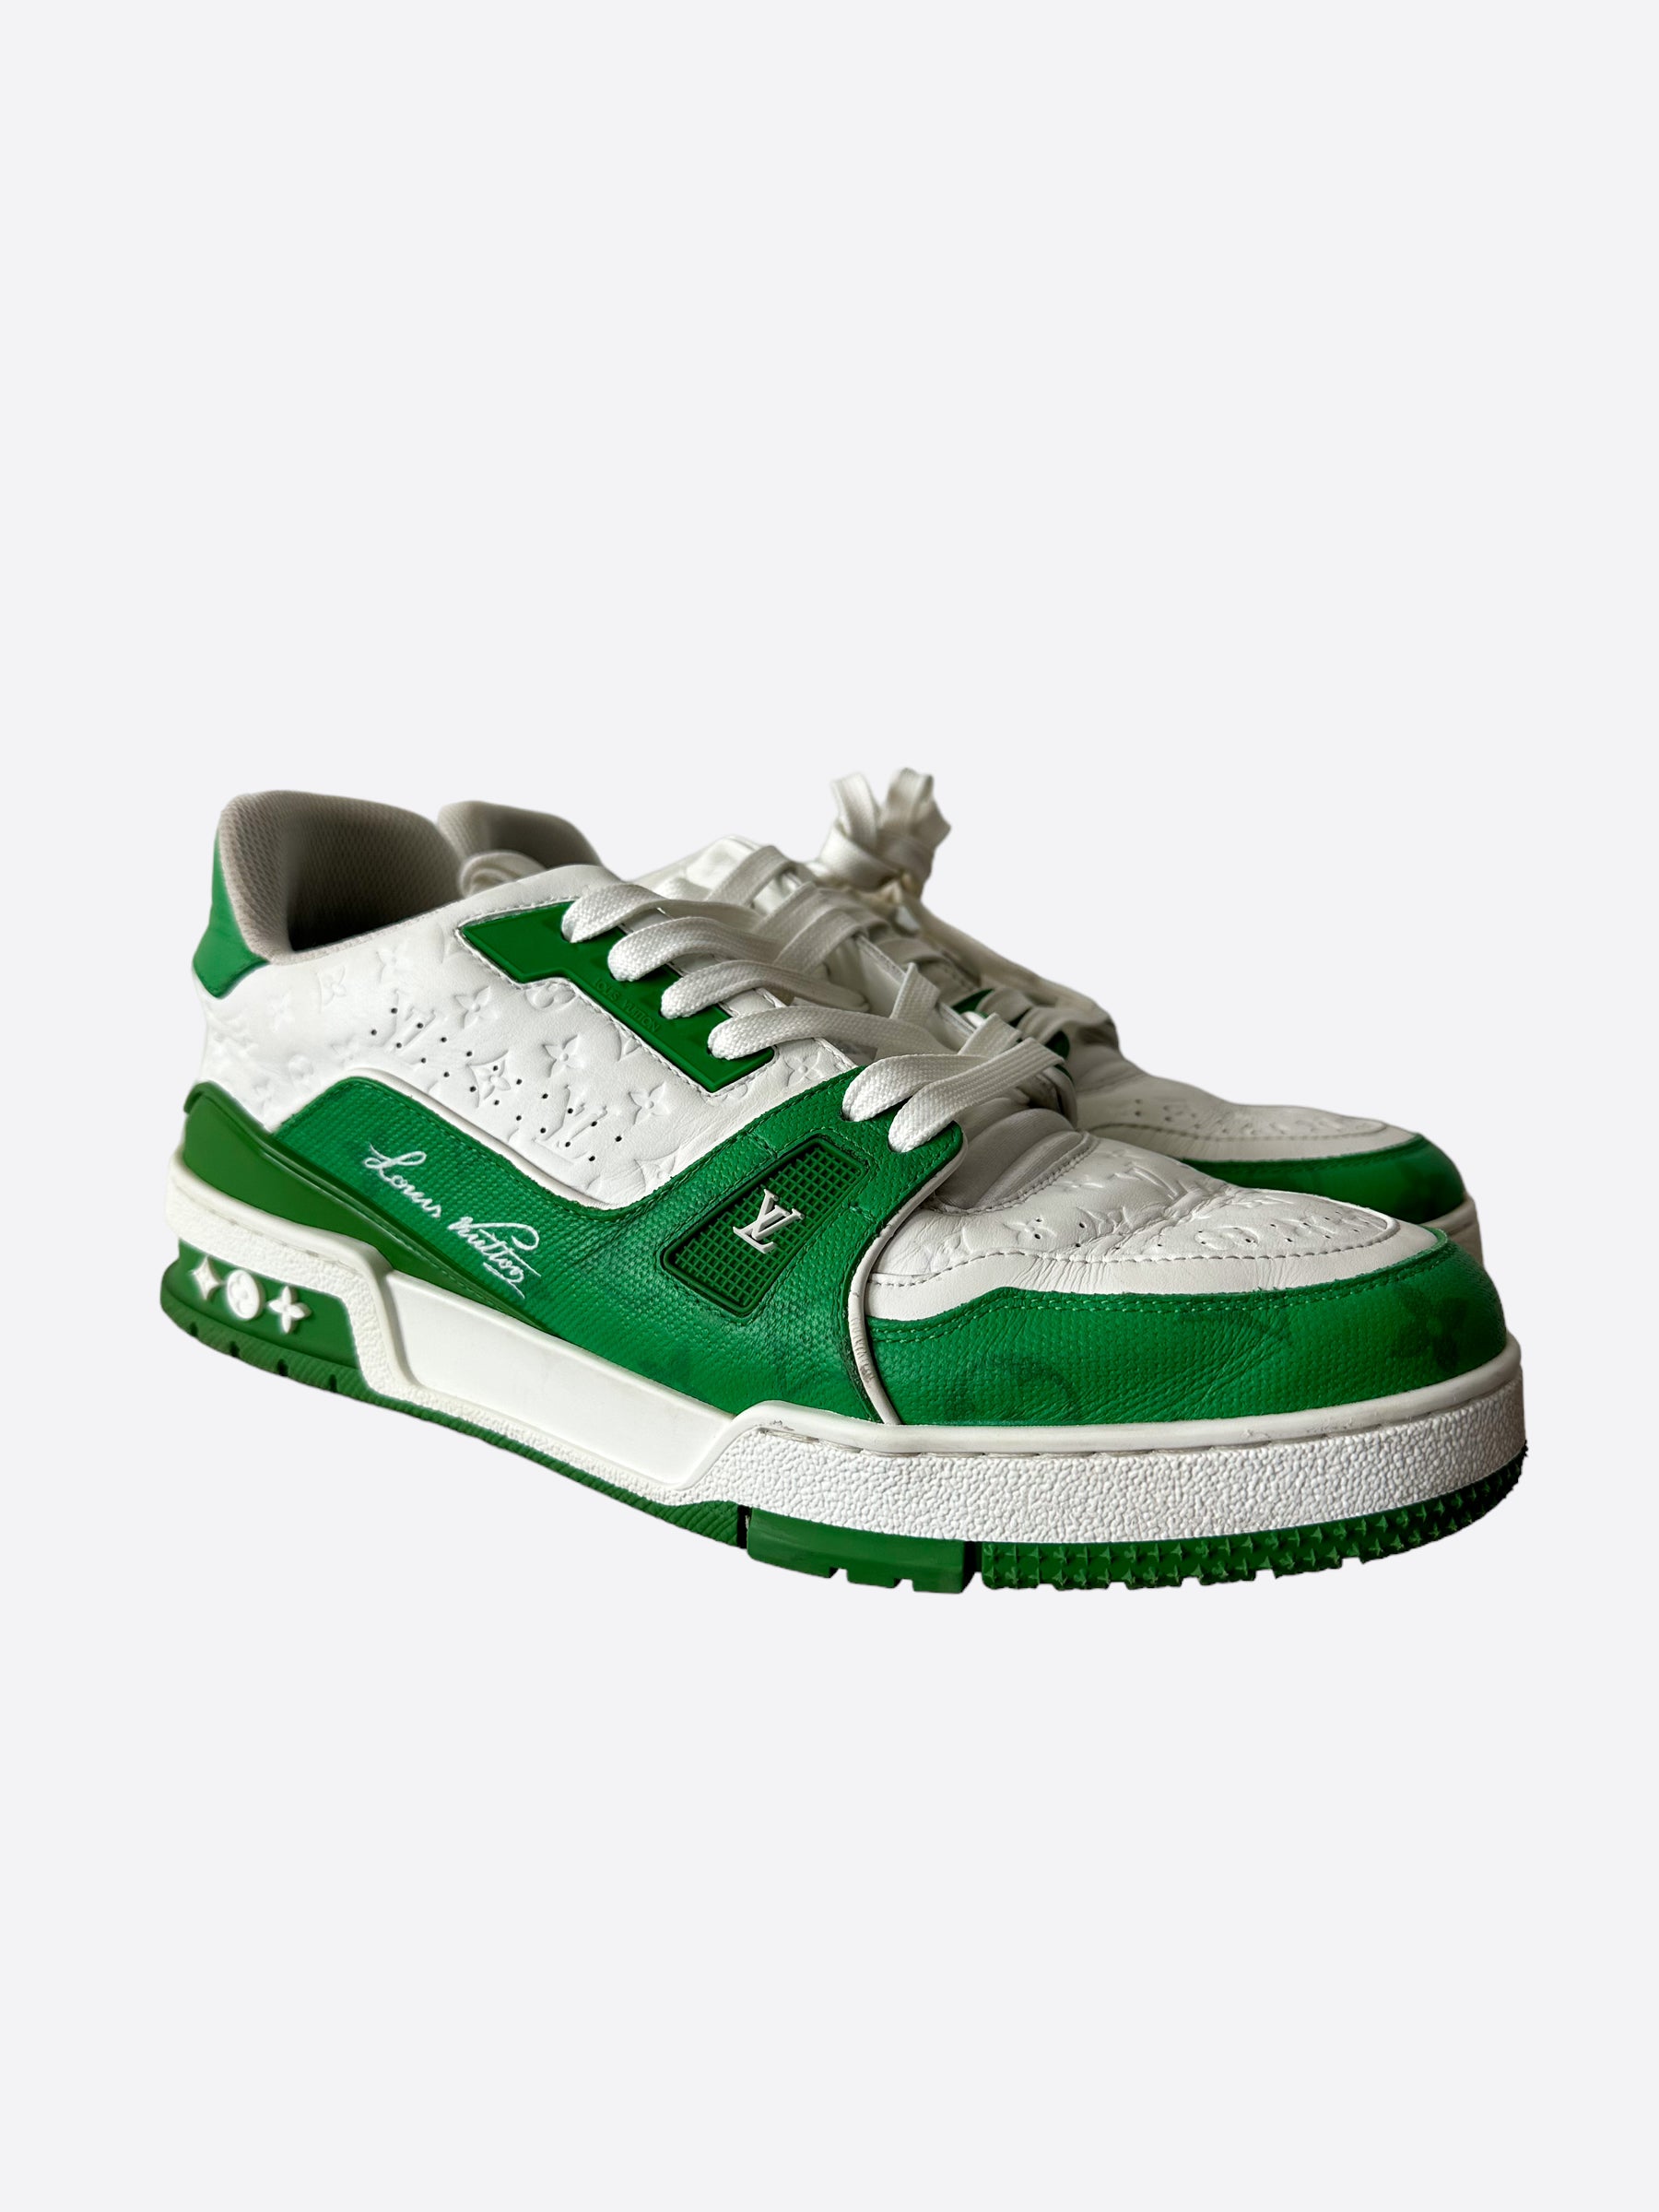 Louis Vuitton Trainer Sneaker - Green and White